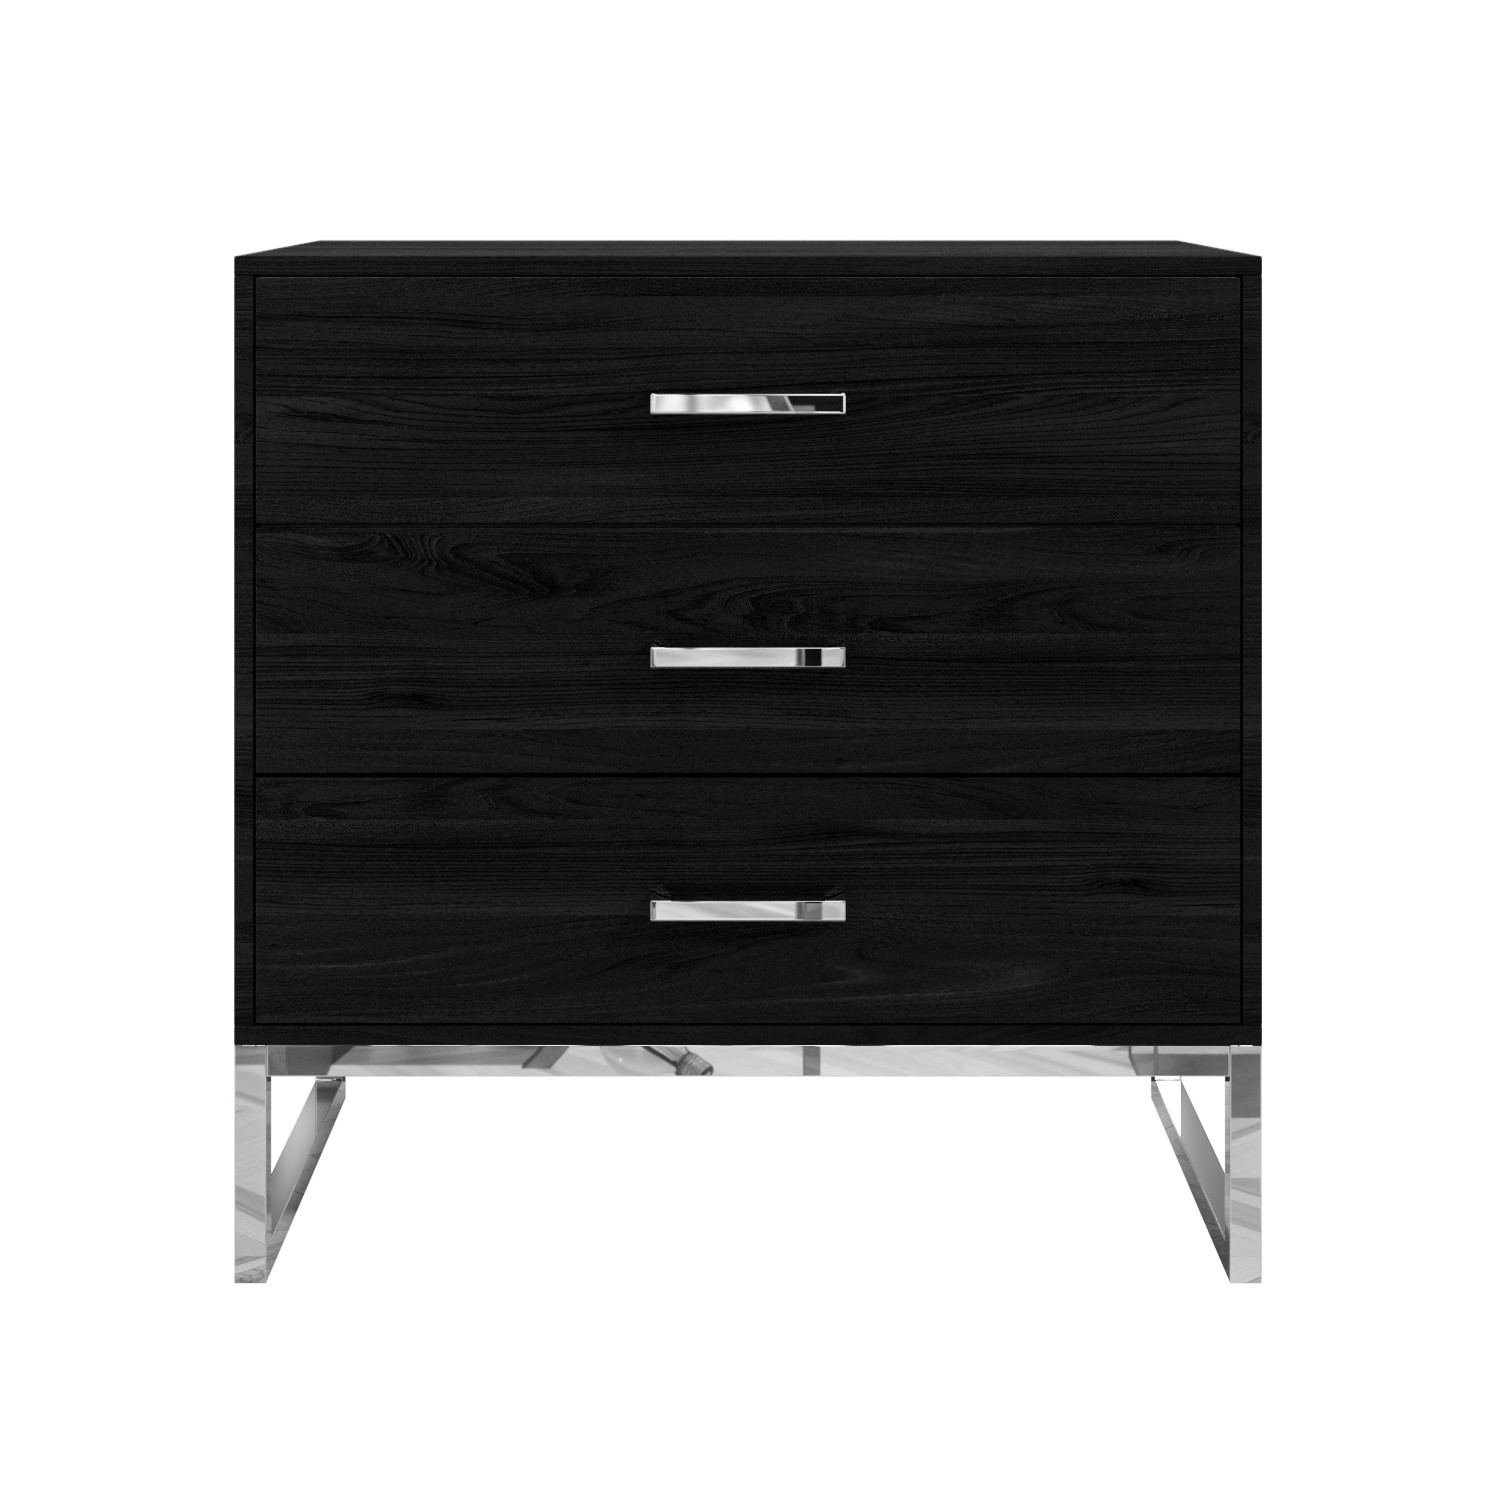 Read more about Black modern chest of 3 drawers with legs kaia